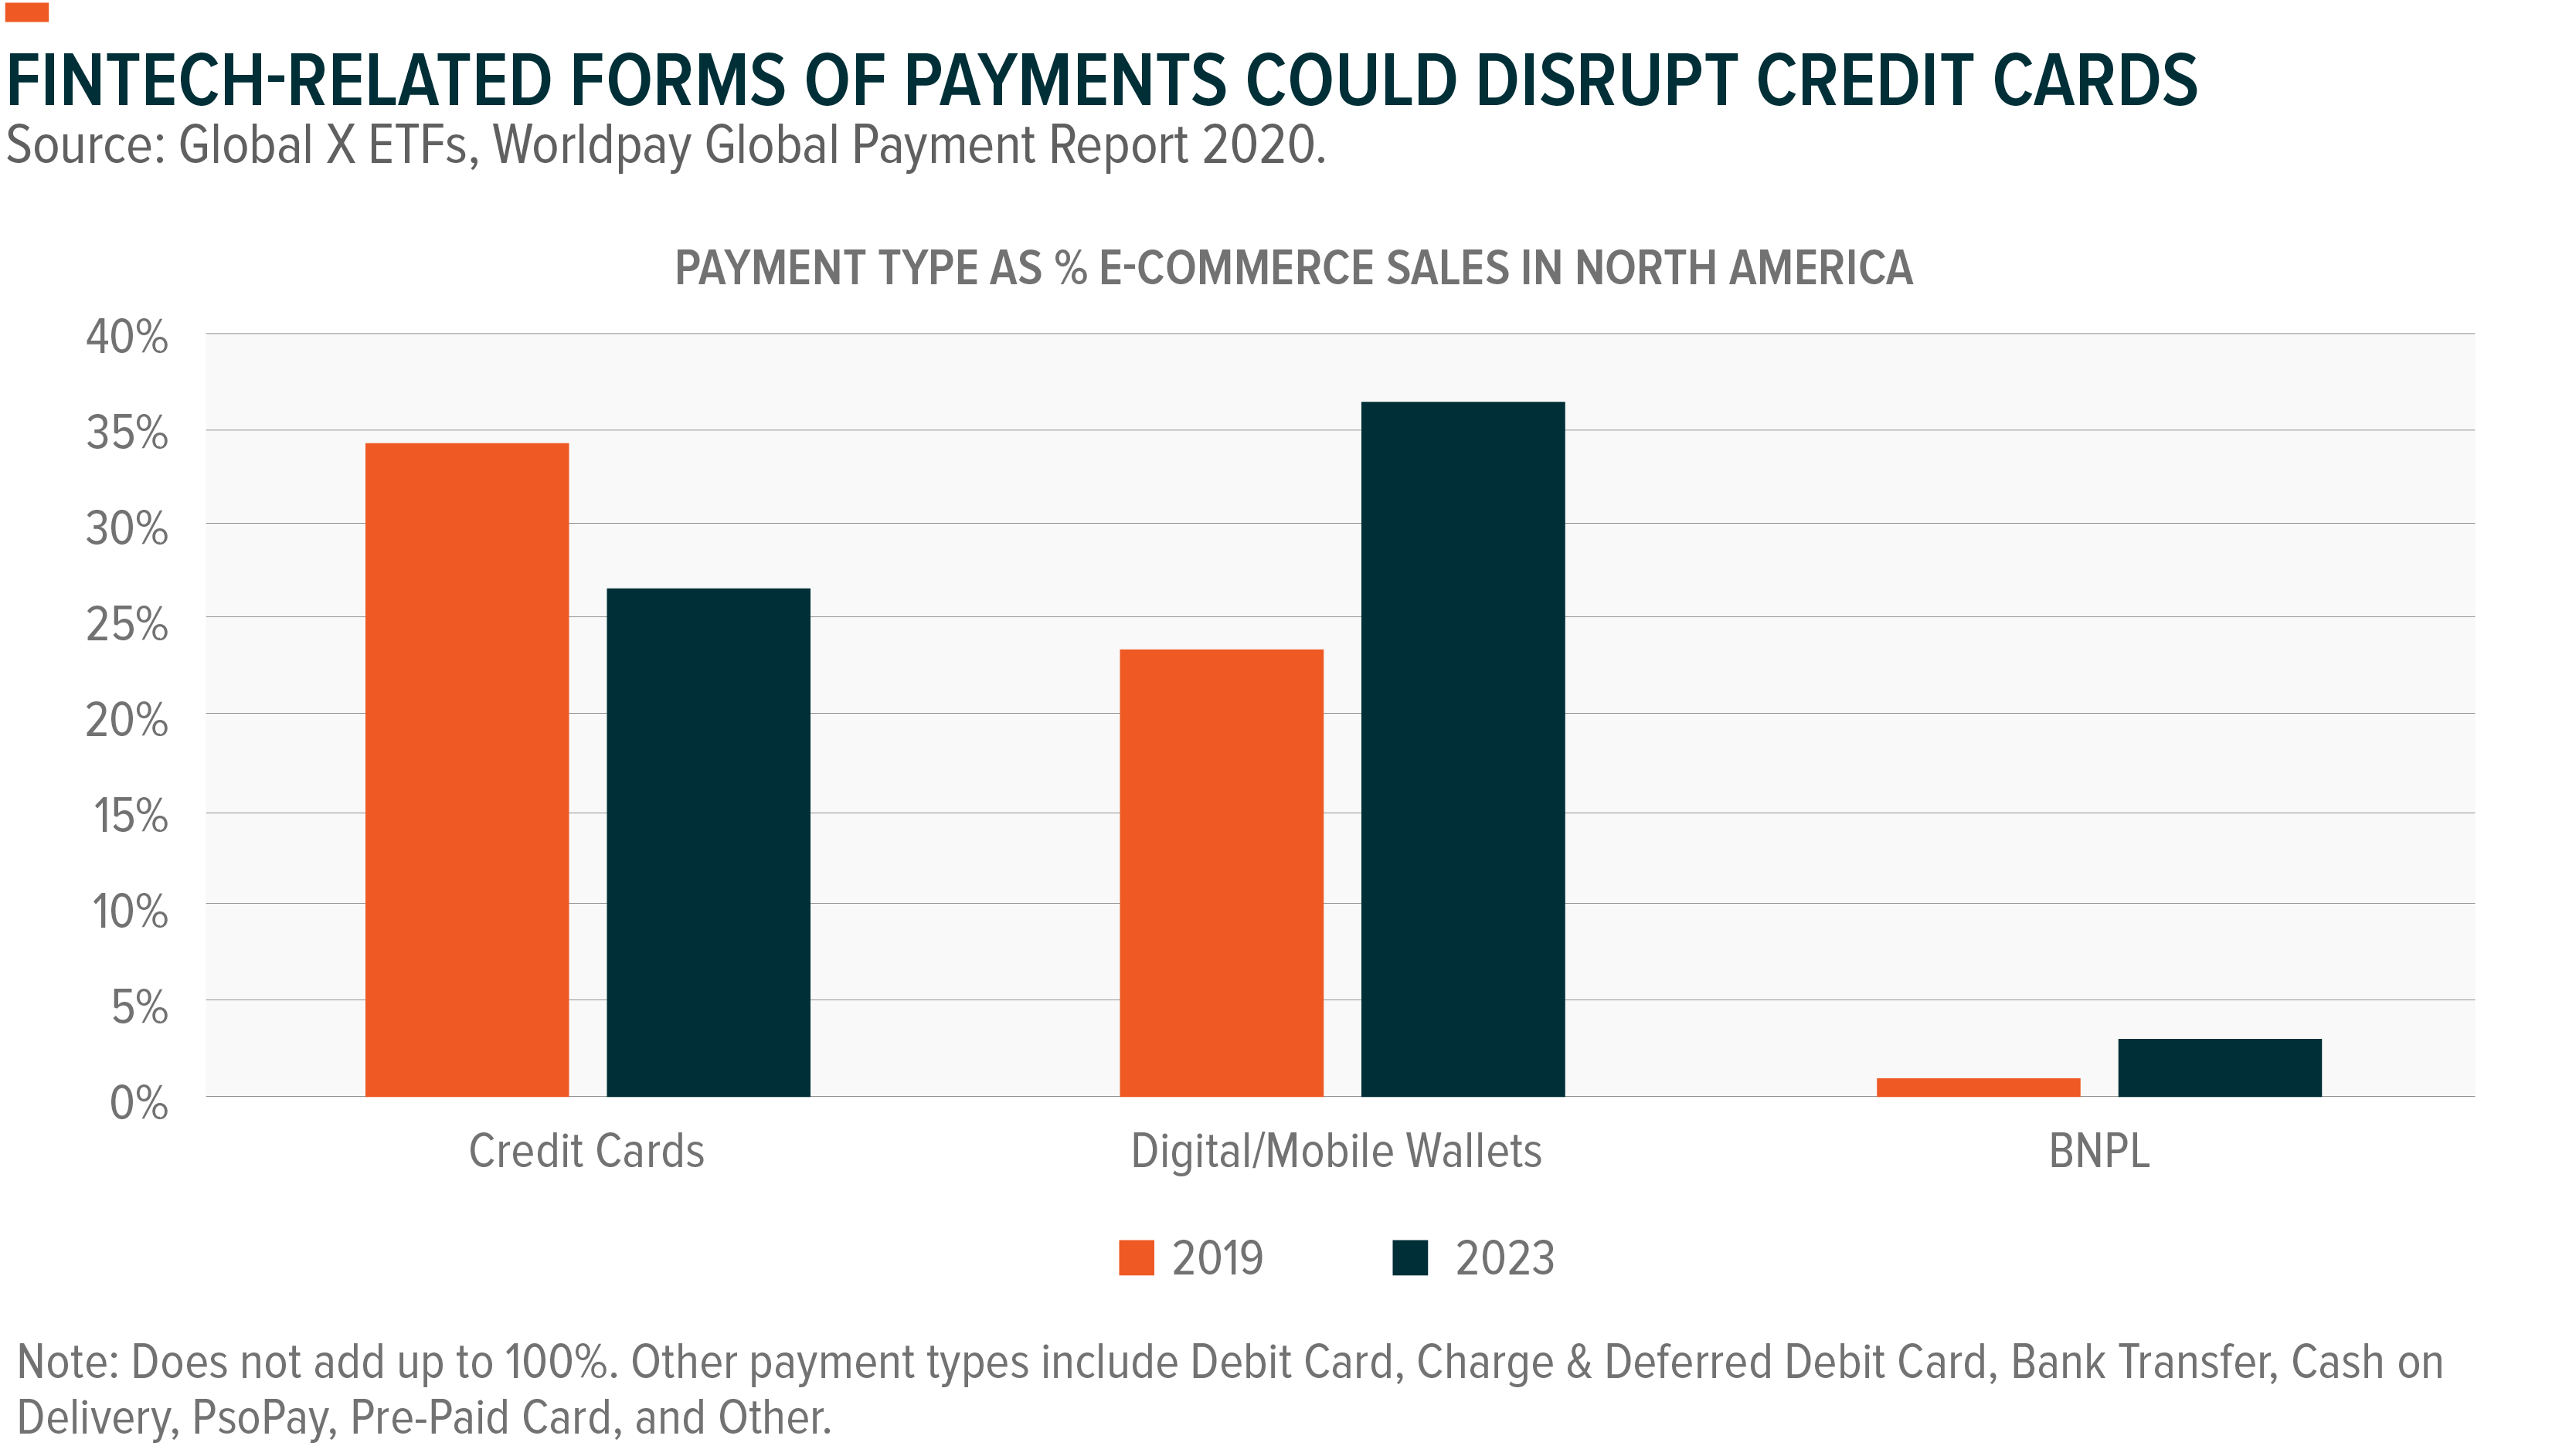 FinTech-Related Forms of Payments Could Disrupt Credit Cards